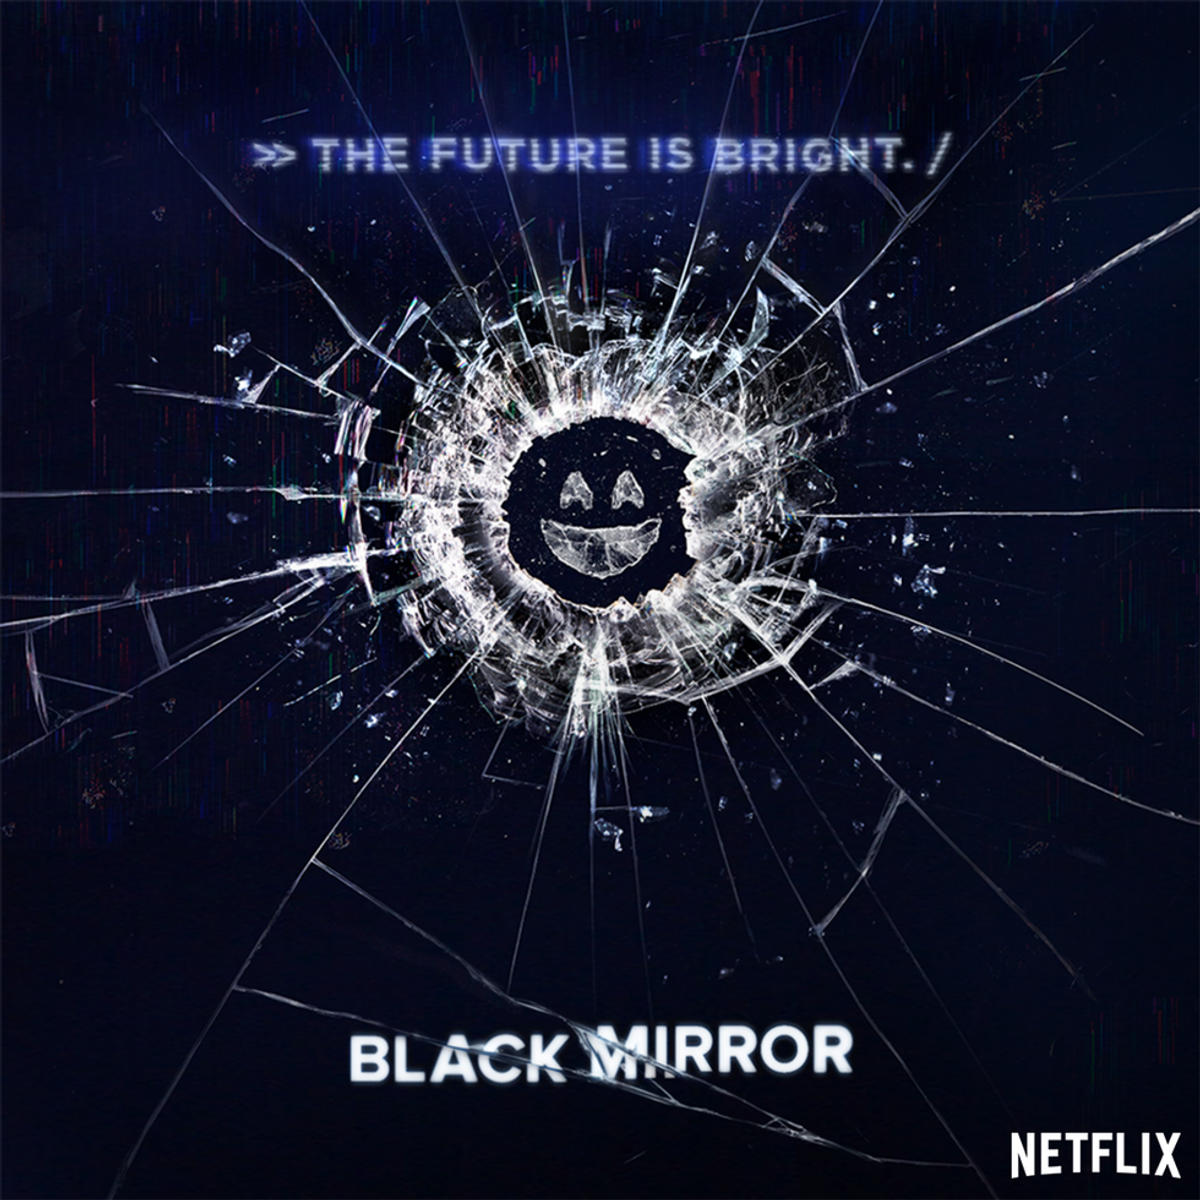 Black Mirror: The Sci-Fi show for everyone